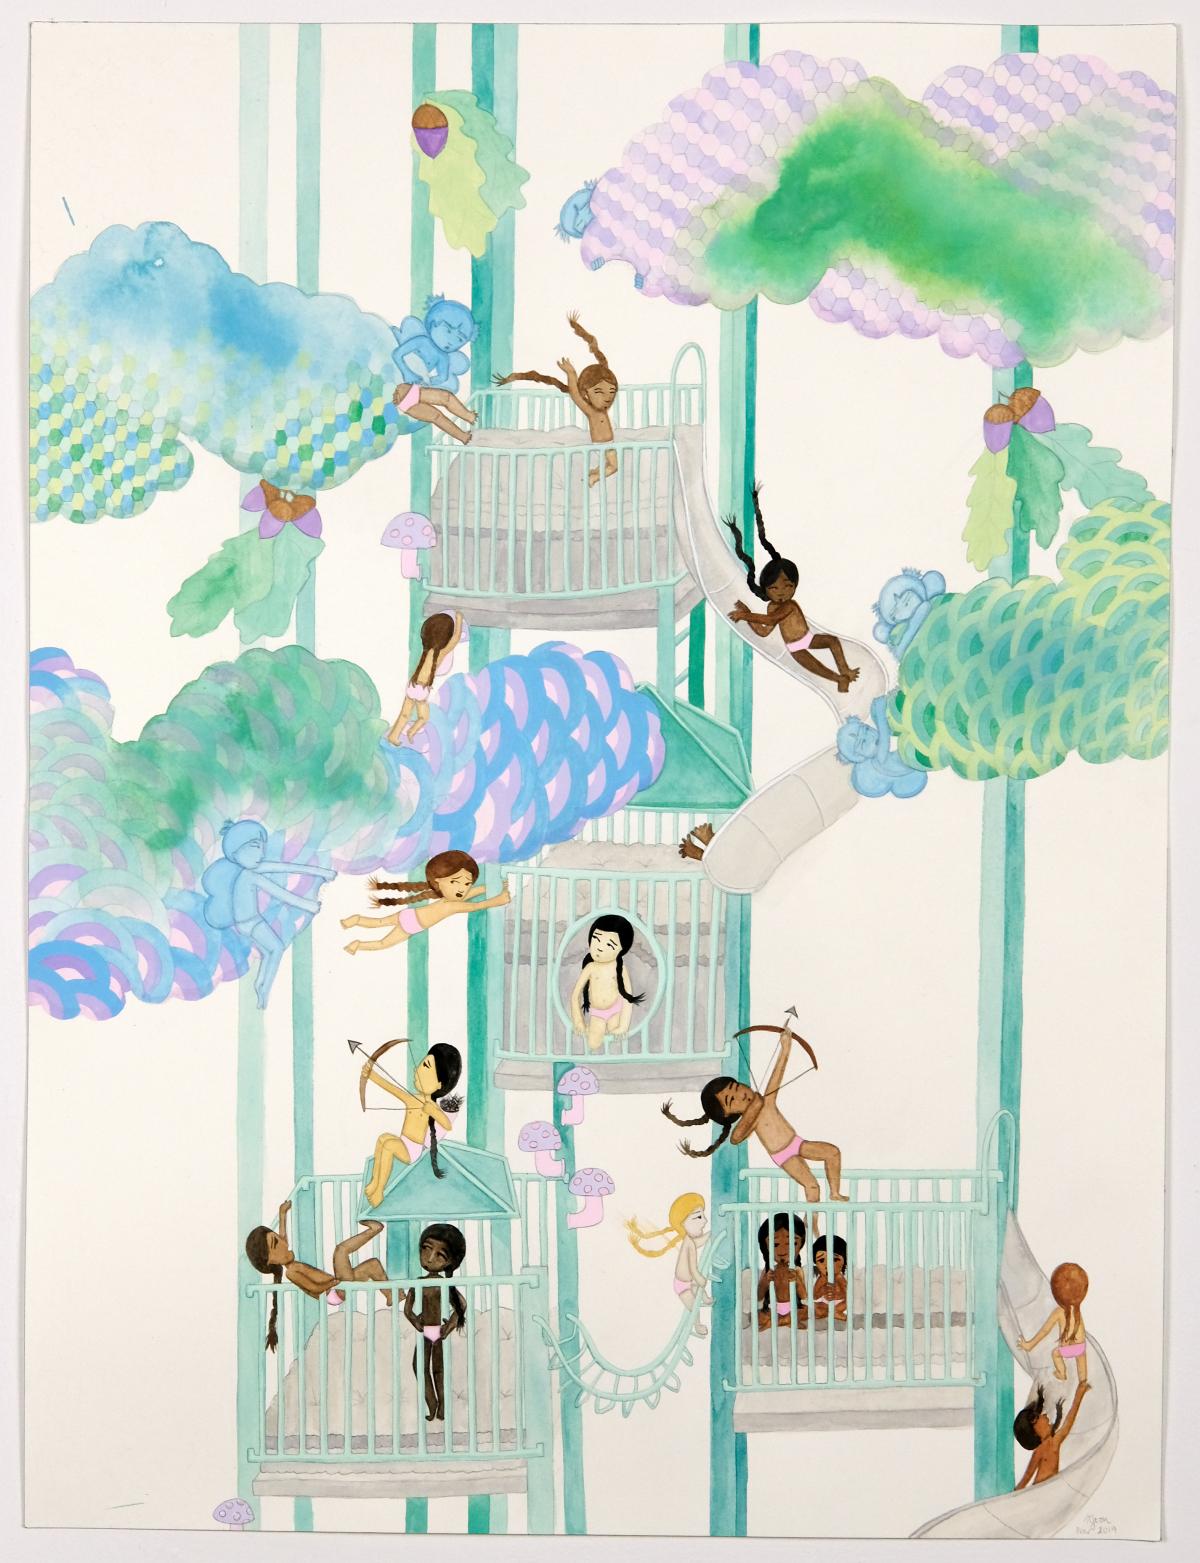 Artwork by Kyung Jeon titled Treehouse Urban Jungle Gym Cribs, 2019, Gouache, watercolor, graphite on paper, 24 x 18 inches, 62 x 46 cm